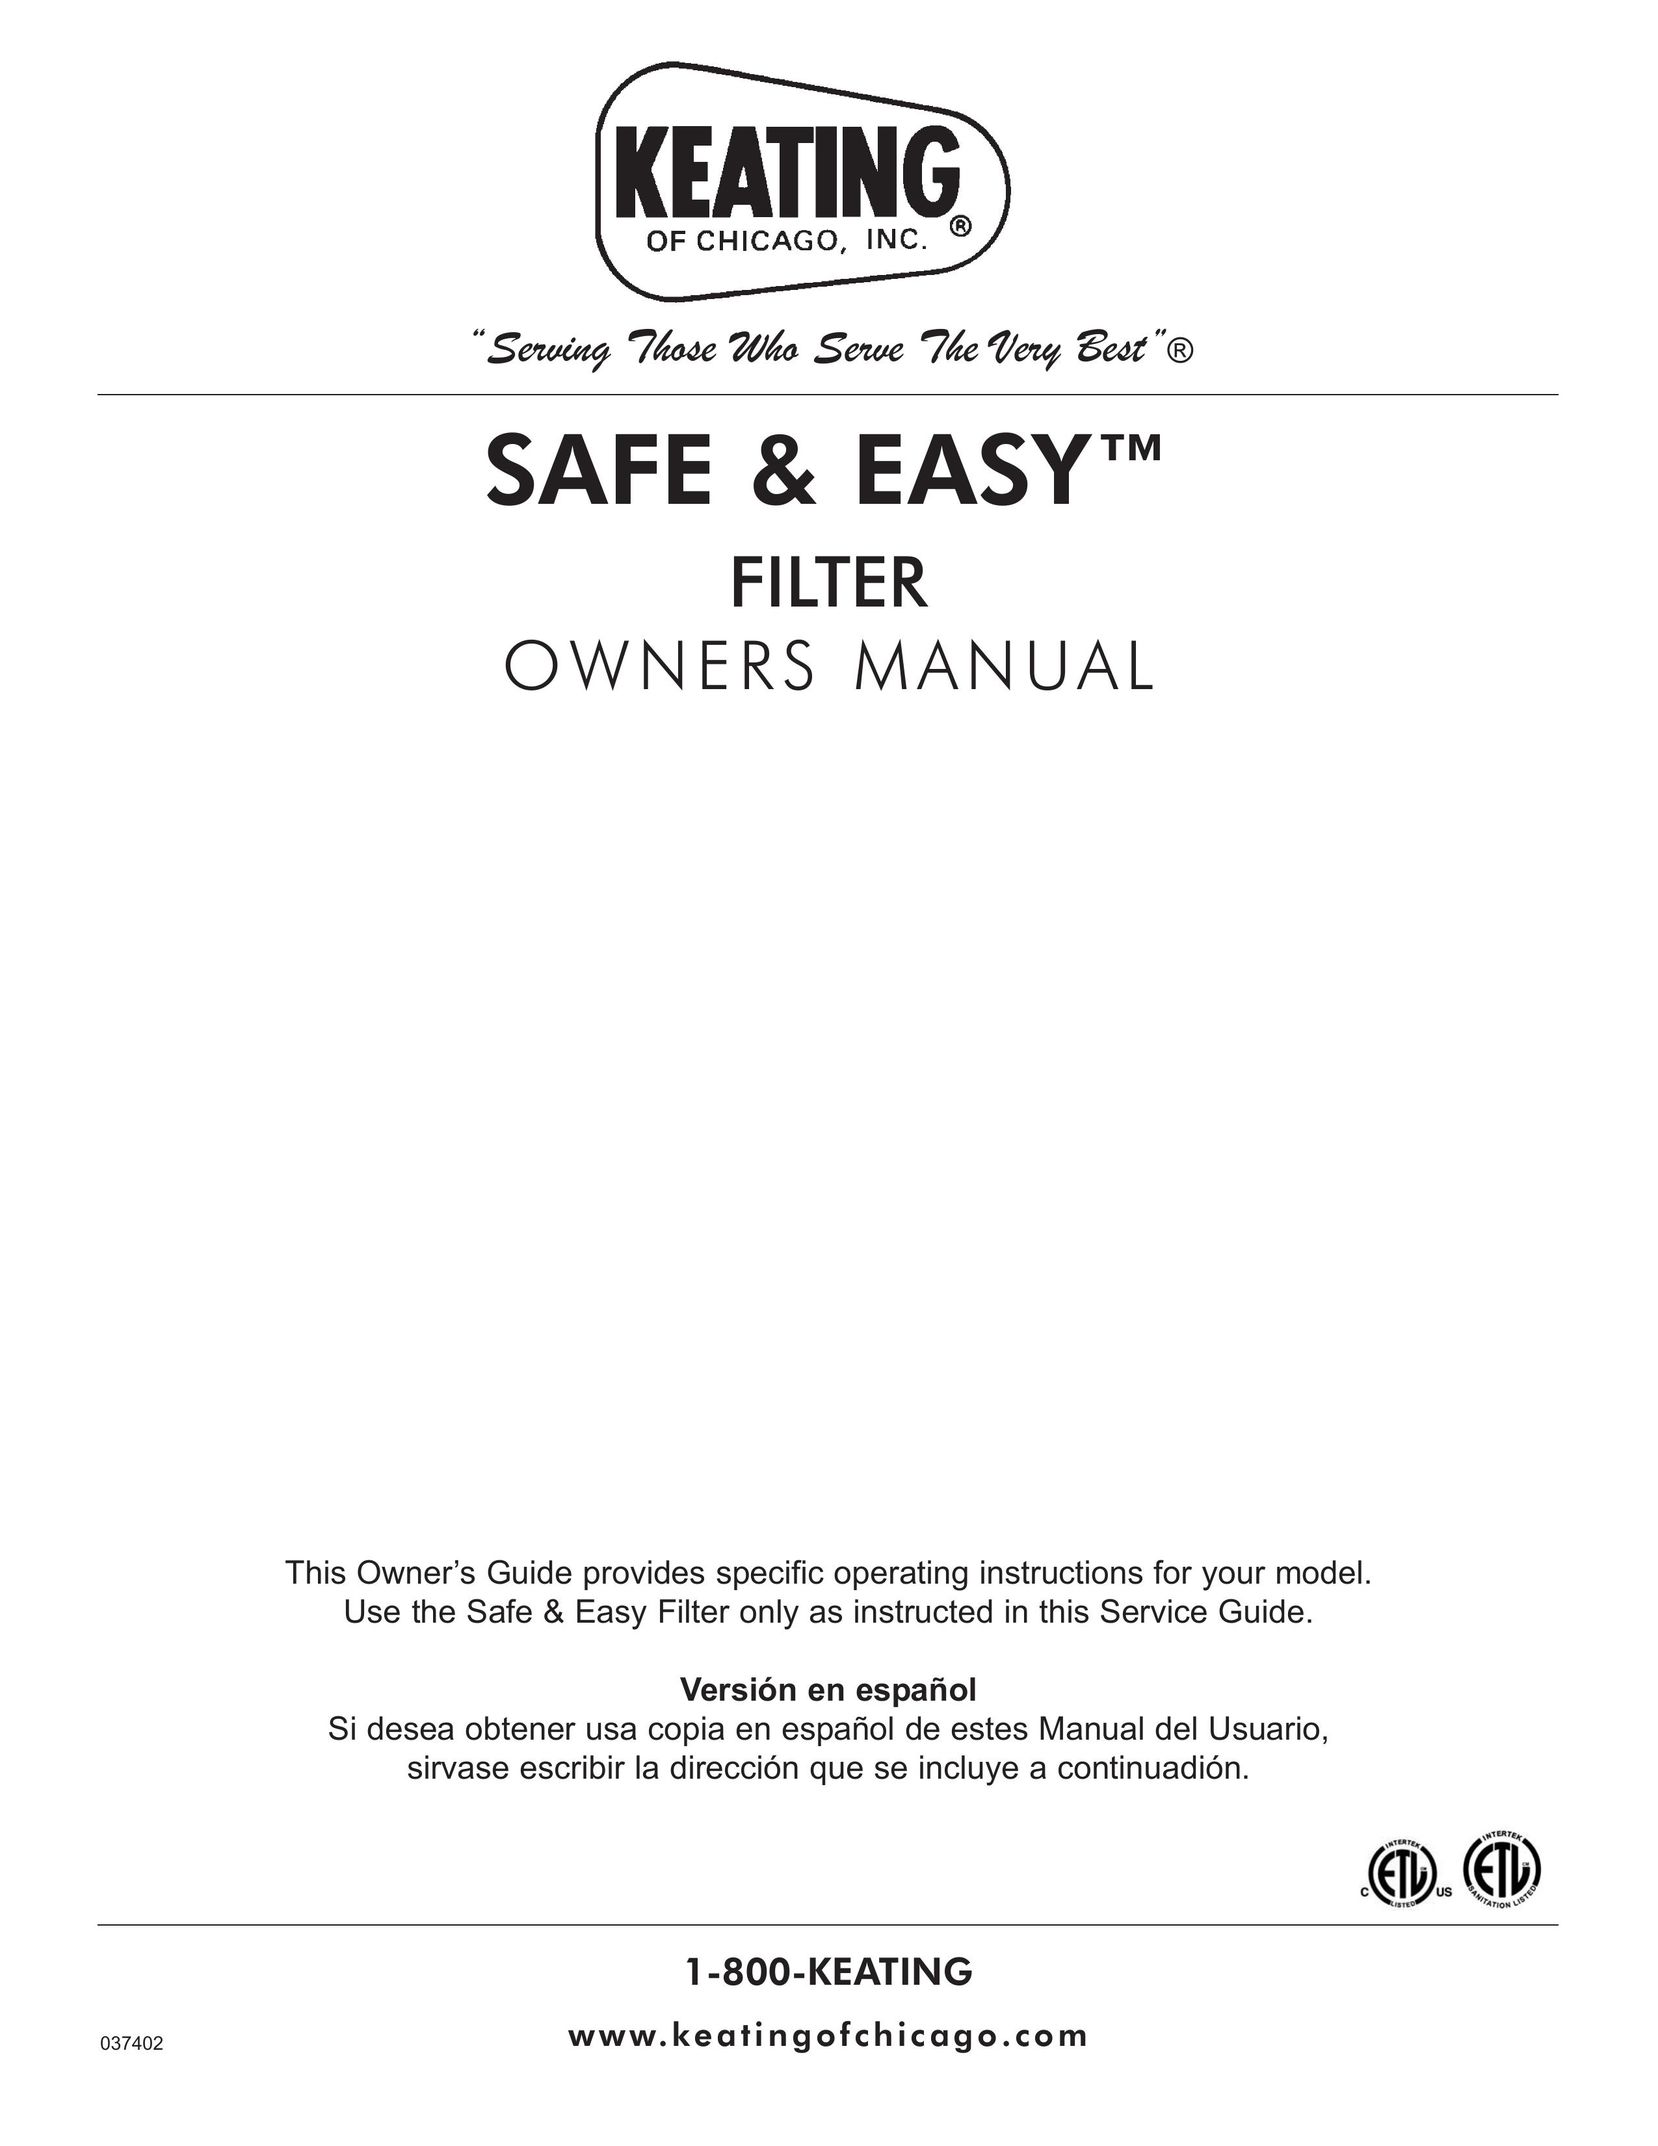 Keating Of Chicago Safe and Easy Filter Air Cleaner User Manual